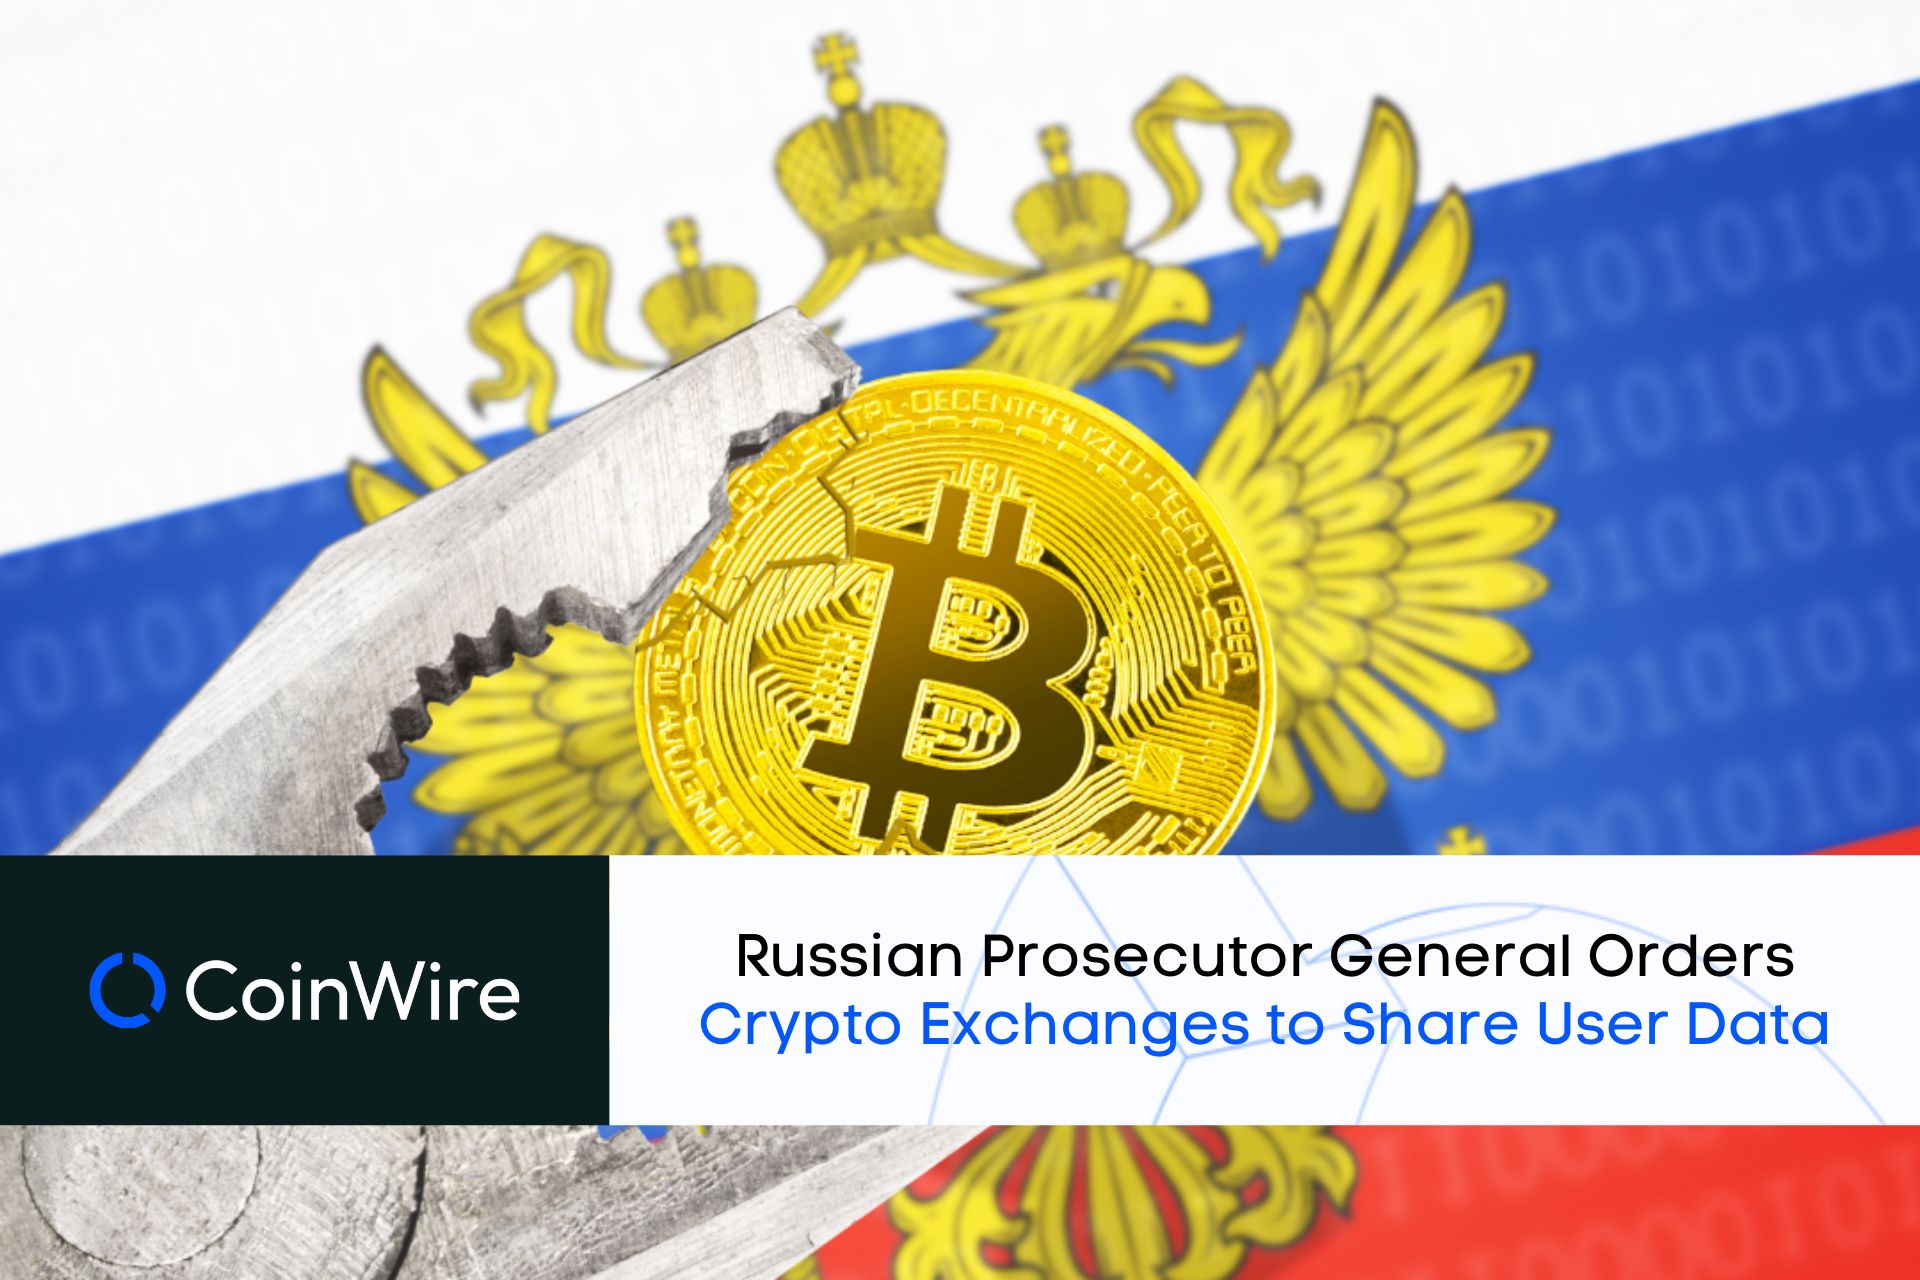 Russian Prosecutor General Orders Crypto Exchanges To Share User Data